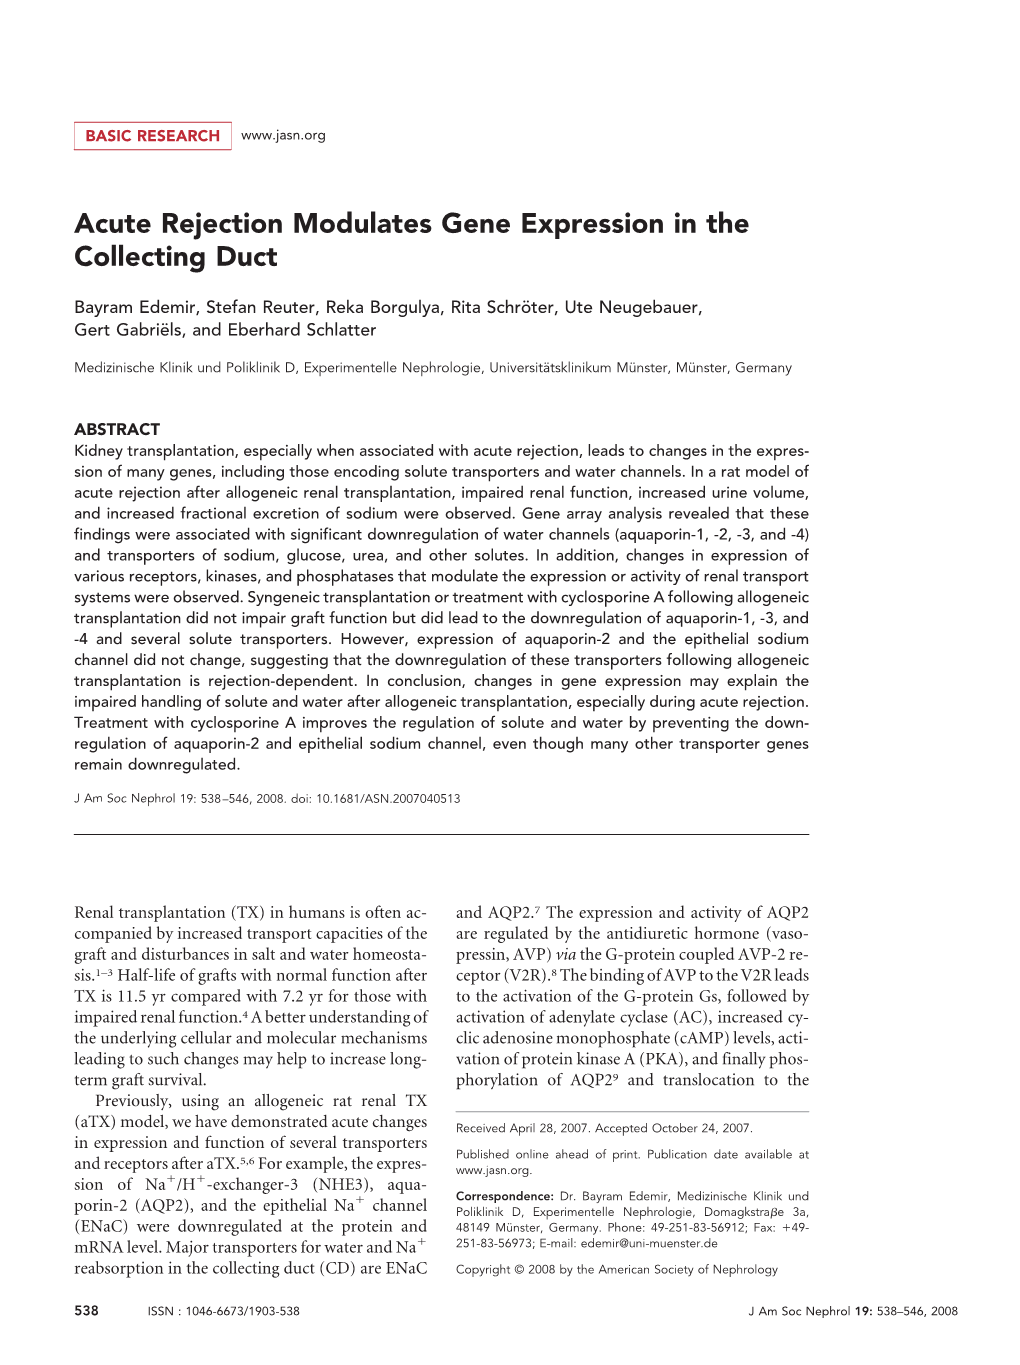 Acute Rejection Modulates Gene Expression in the Collecting Duct